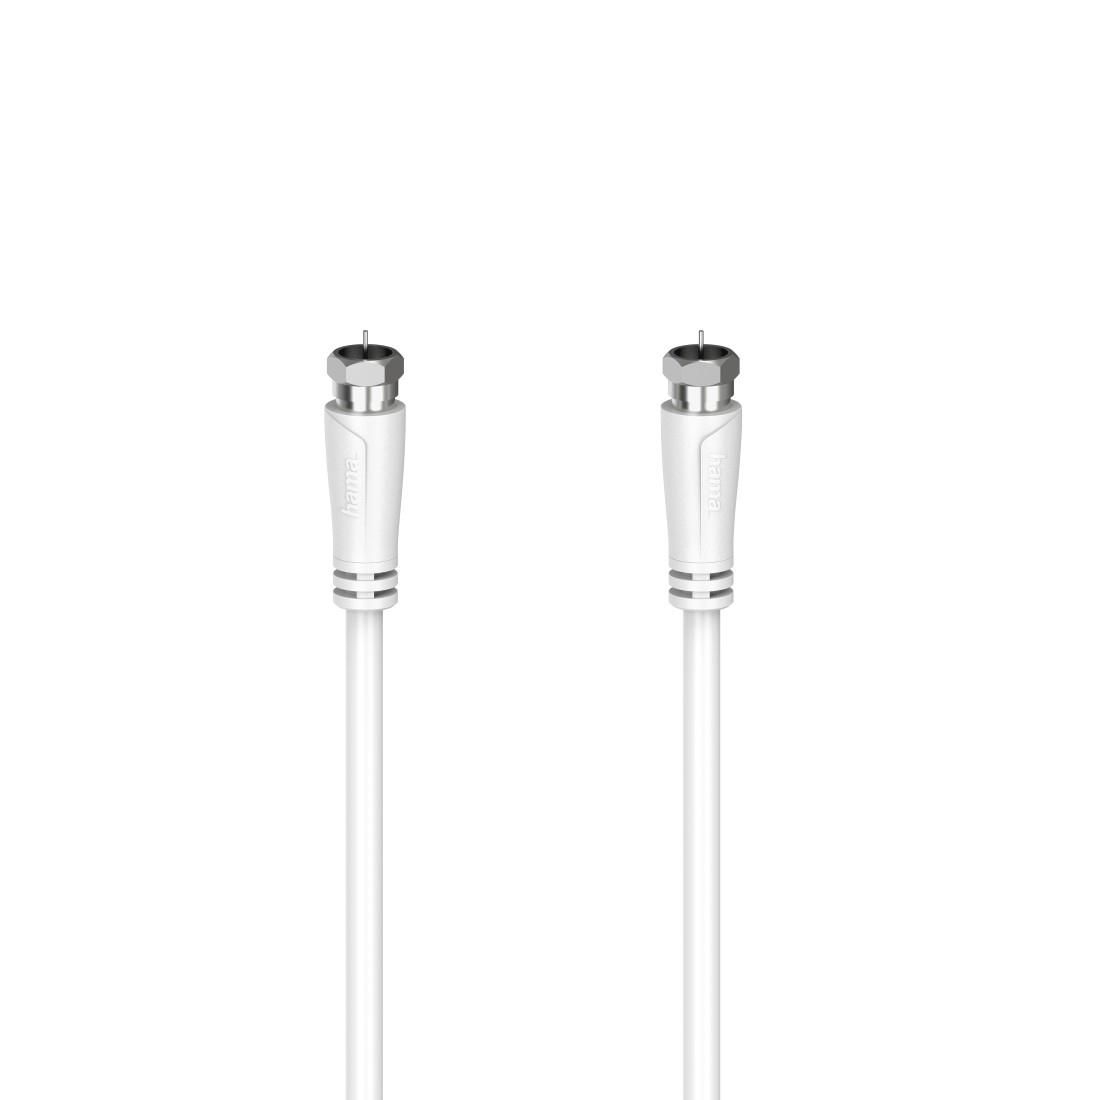 Hama 205063 W128824607 3 Coaxial Cable 1.5 M F White 